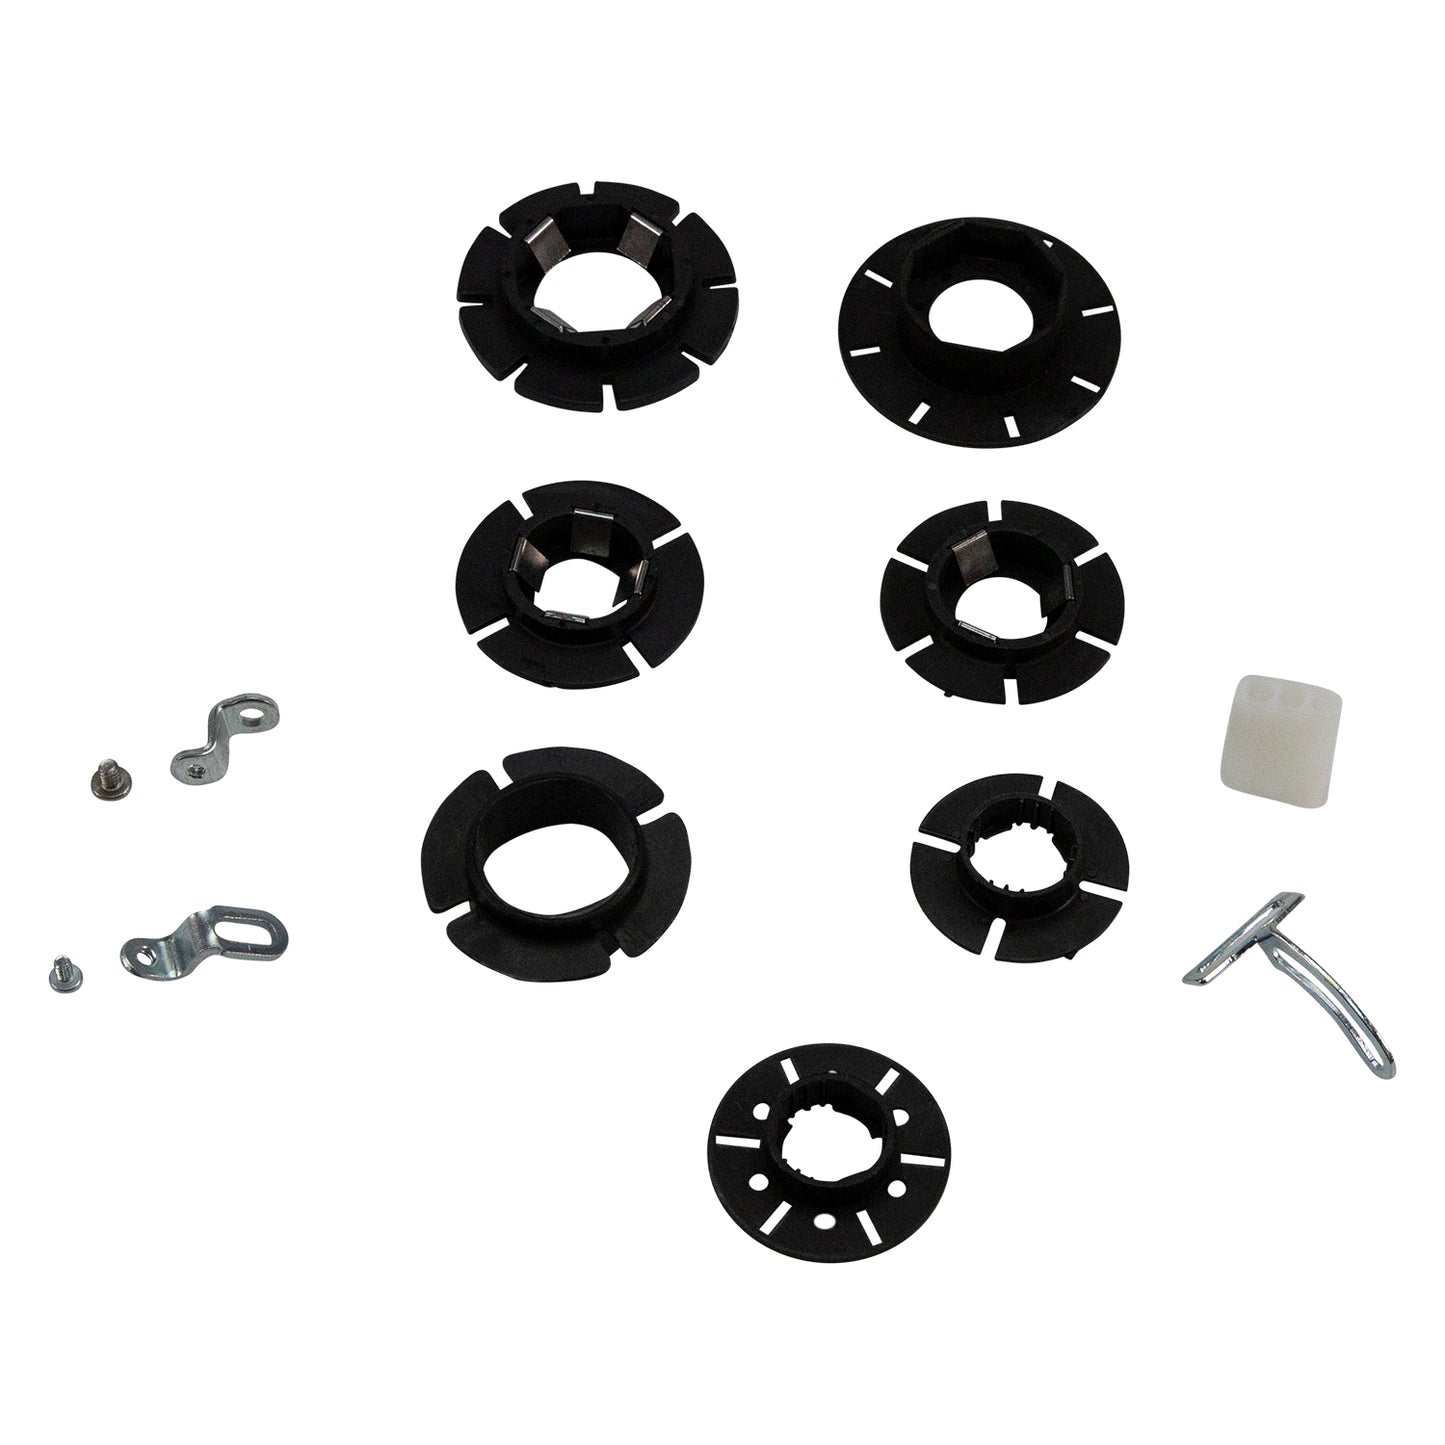 FAST Installation Kit for XR-700 in Imports with 46 or 8 cylinder engines. 700-2231